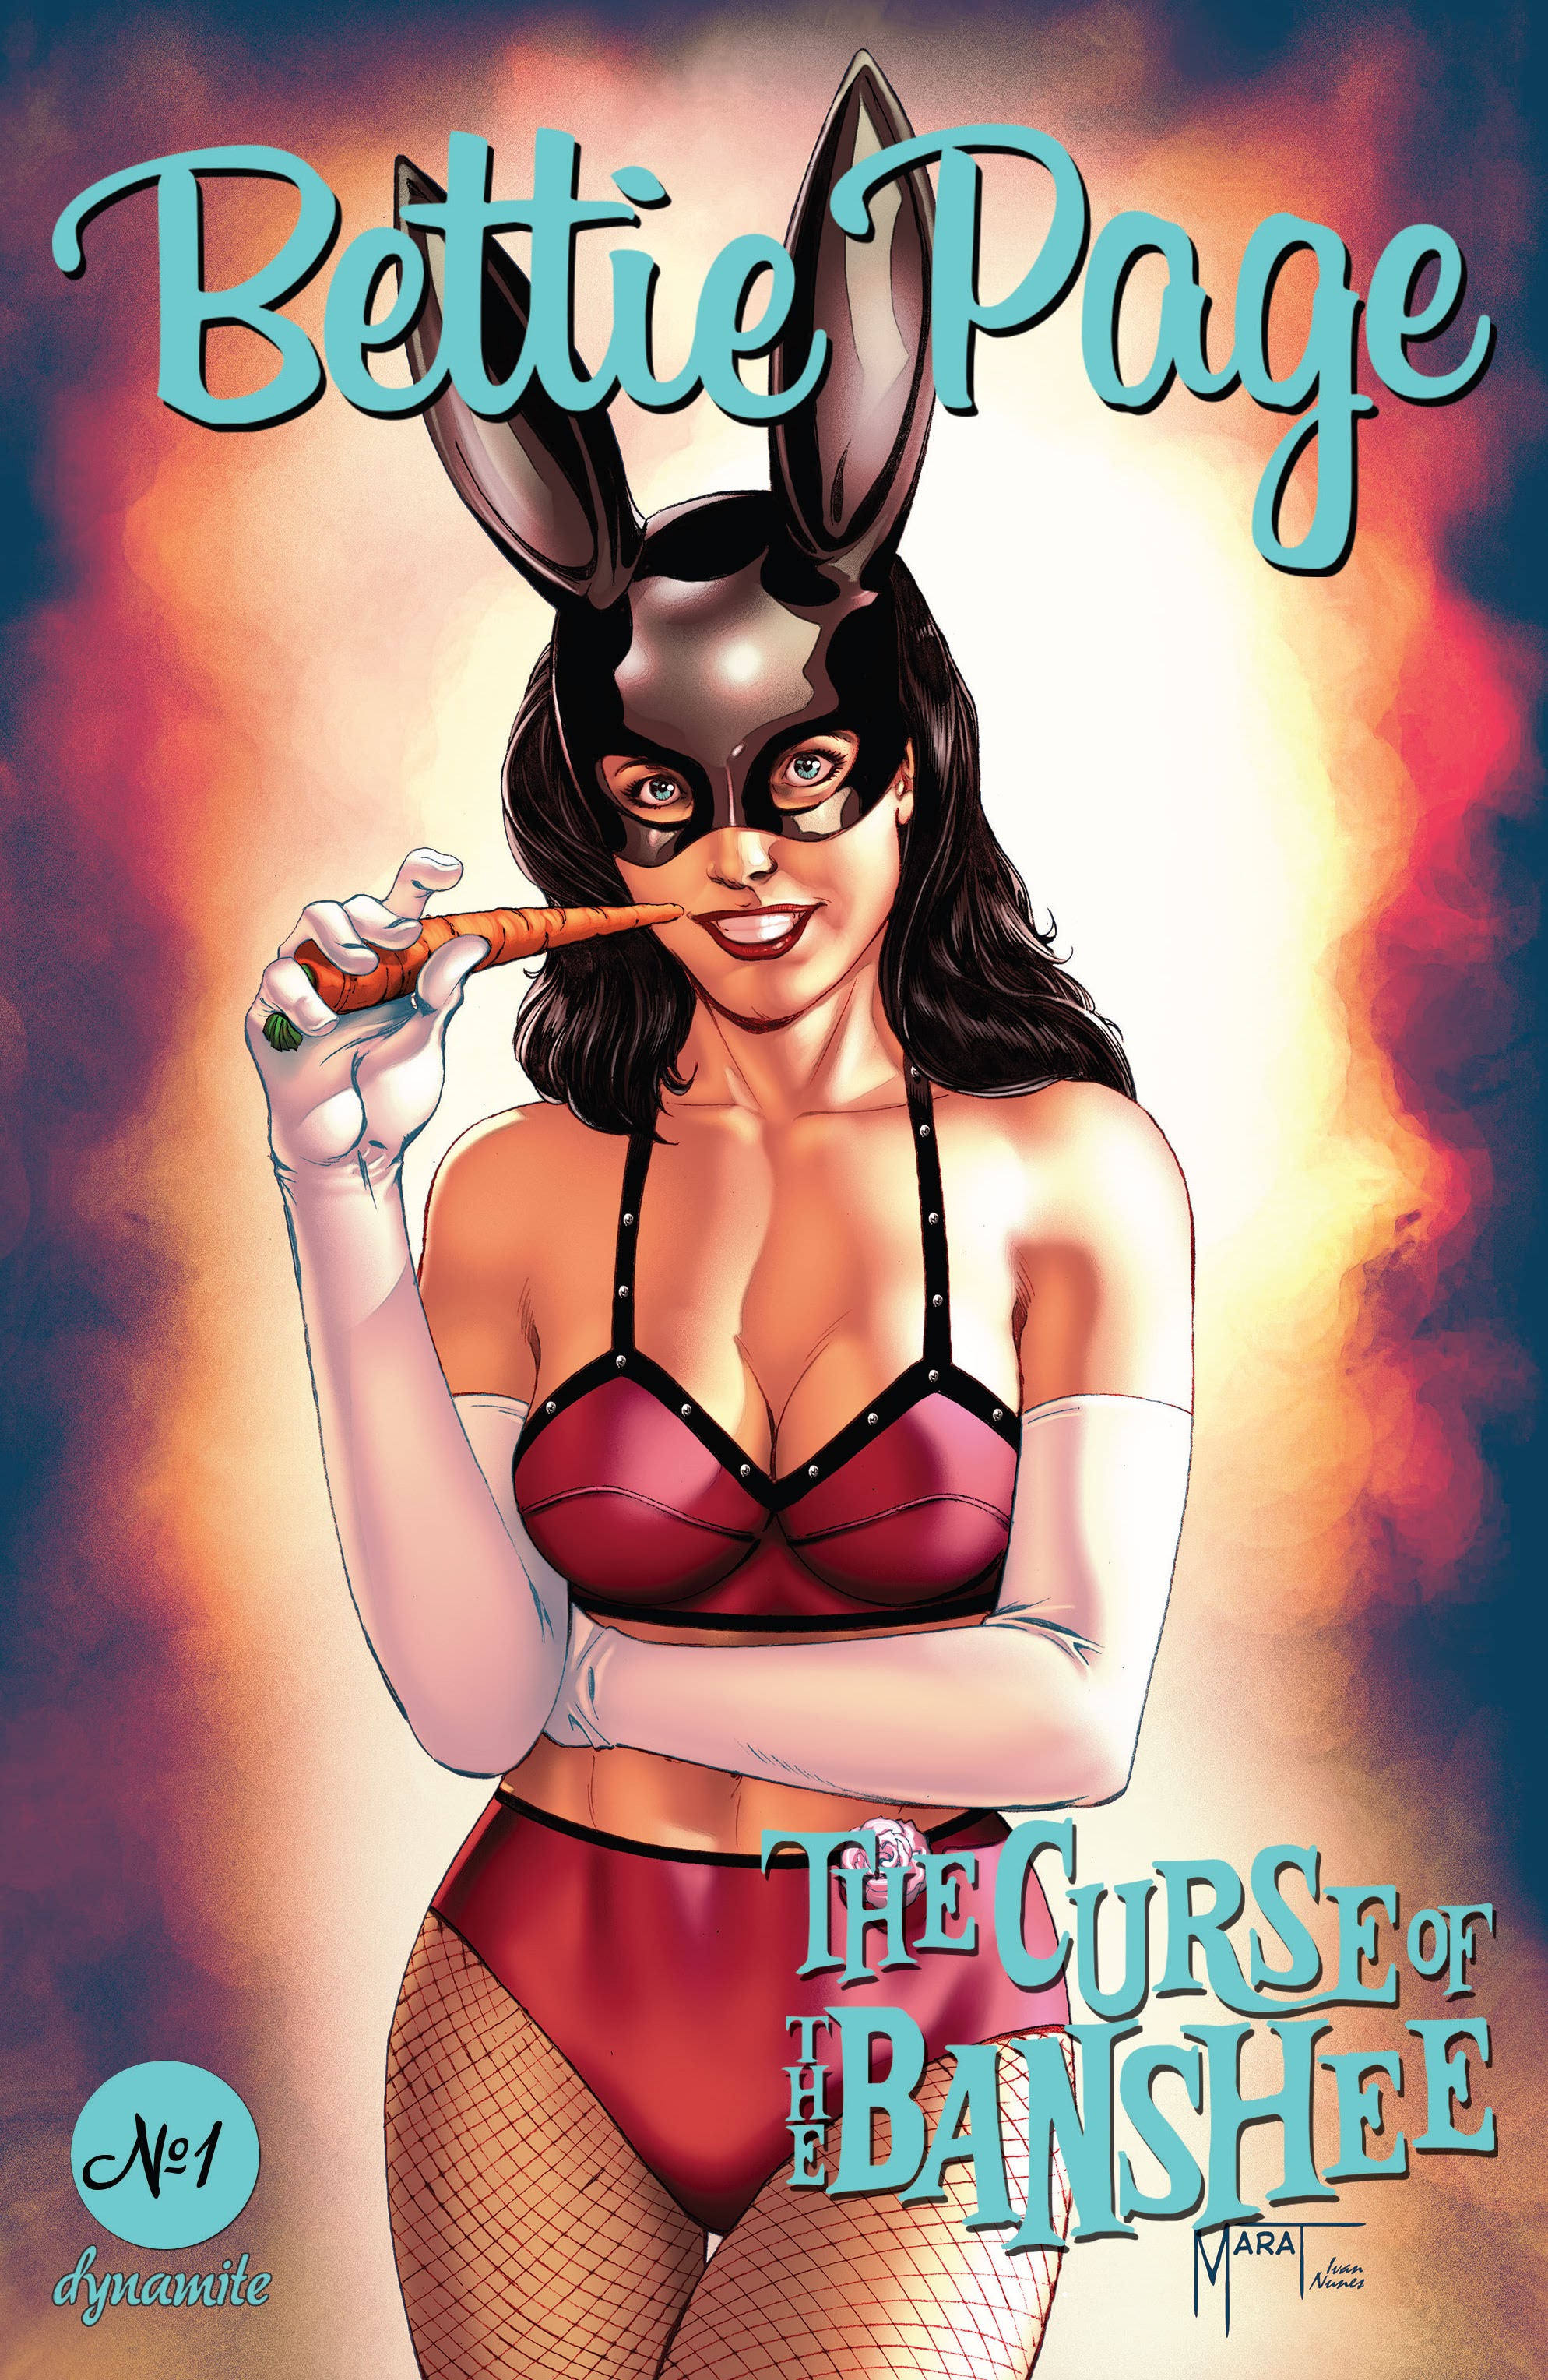 Read online Bettie Page & The Curse of the Banshee comic -  Issue #1 - 1